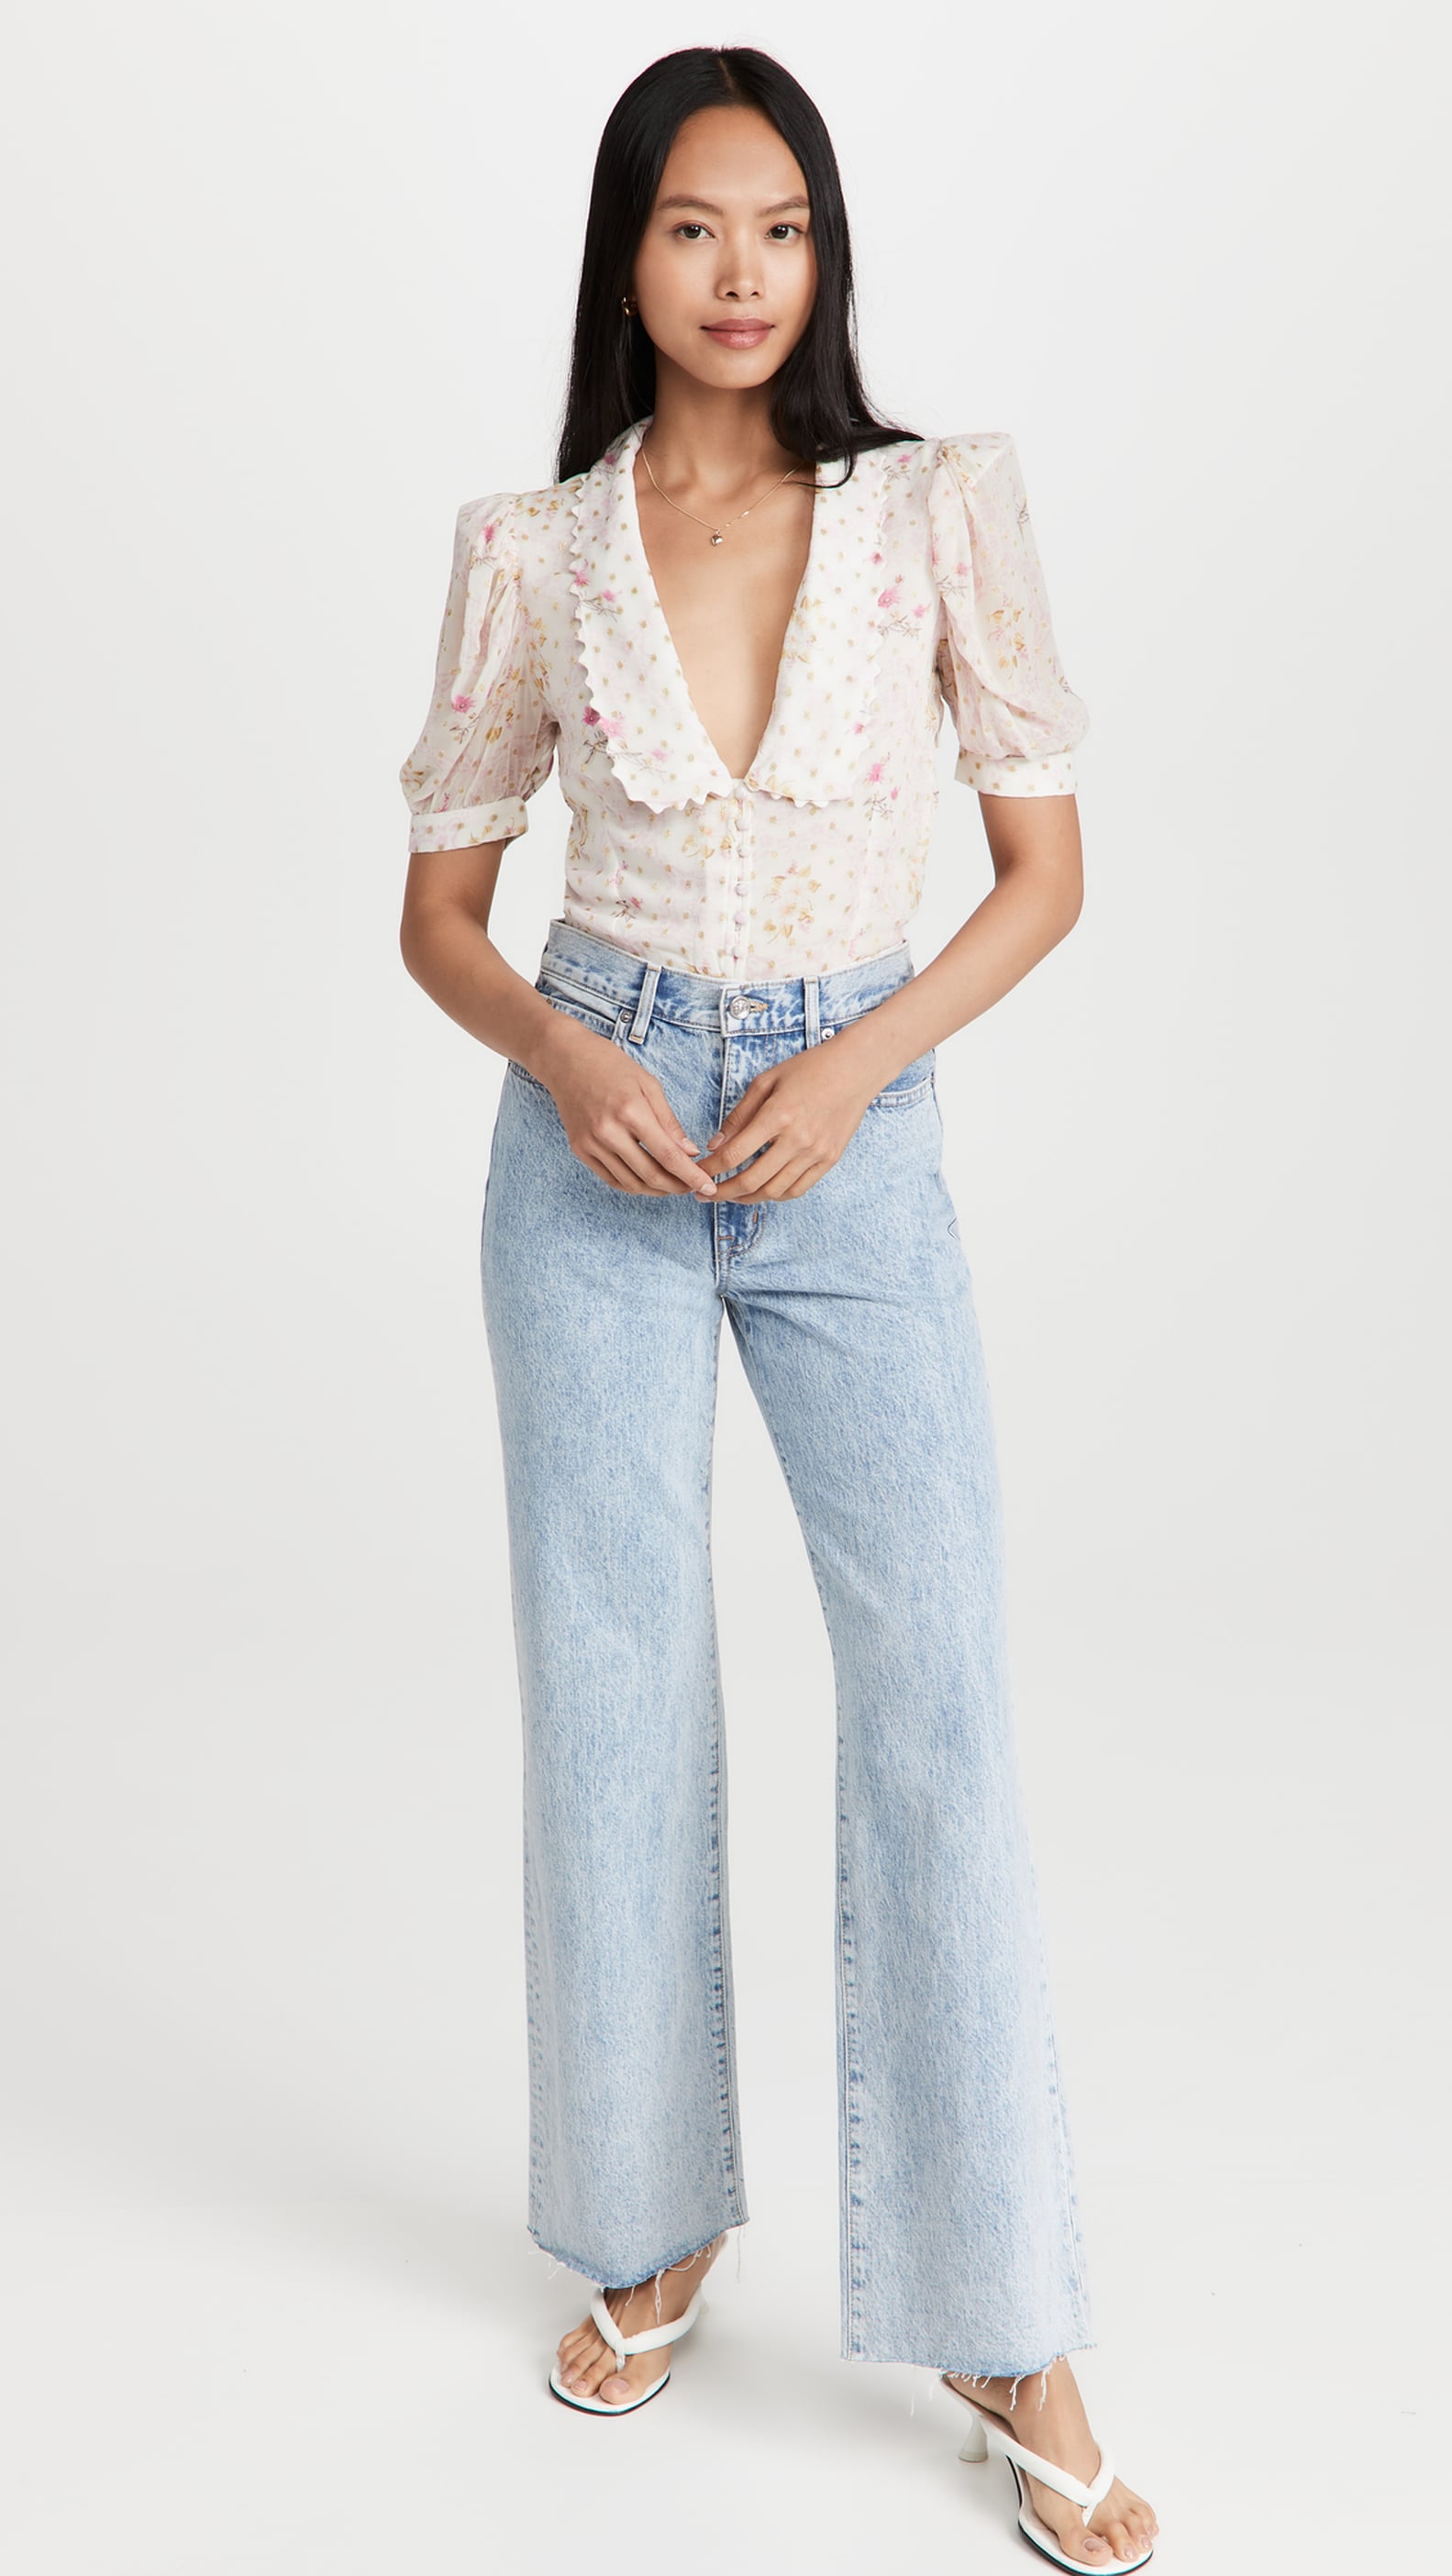 The Best New Arrivals From Shopbop | July 2021 | POPSUGAR Fashion